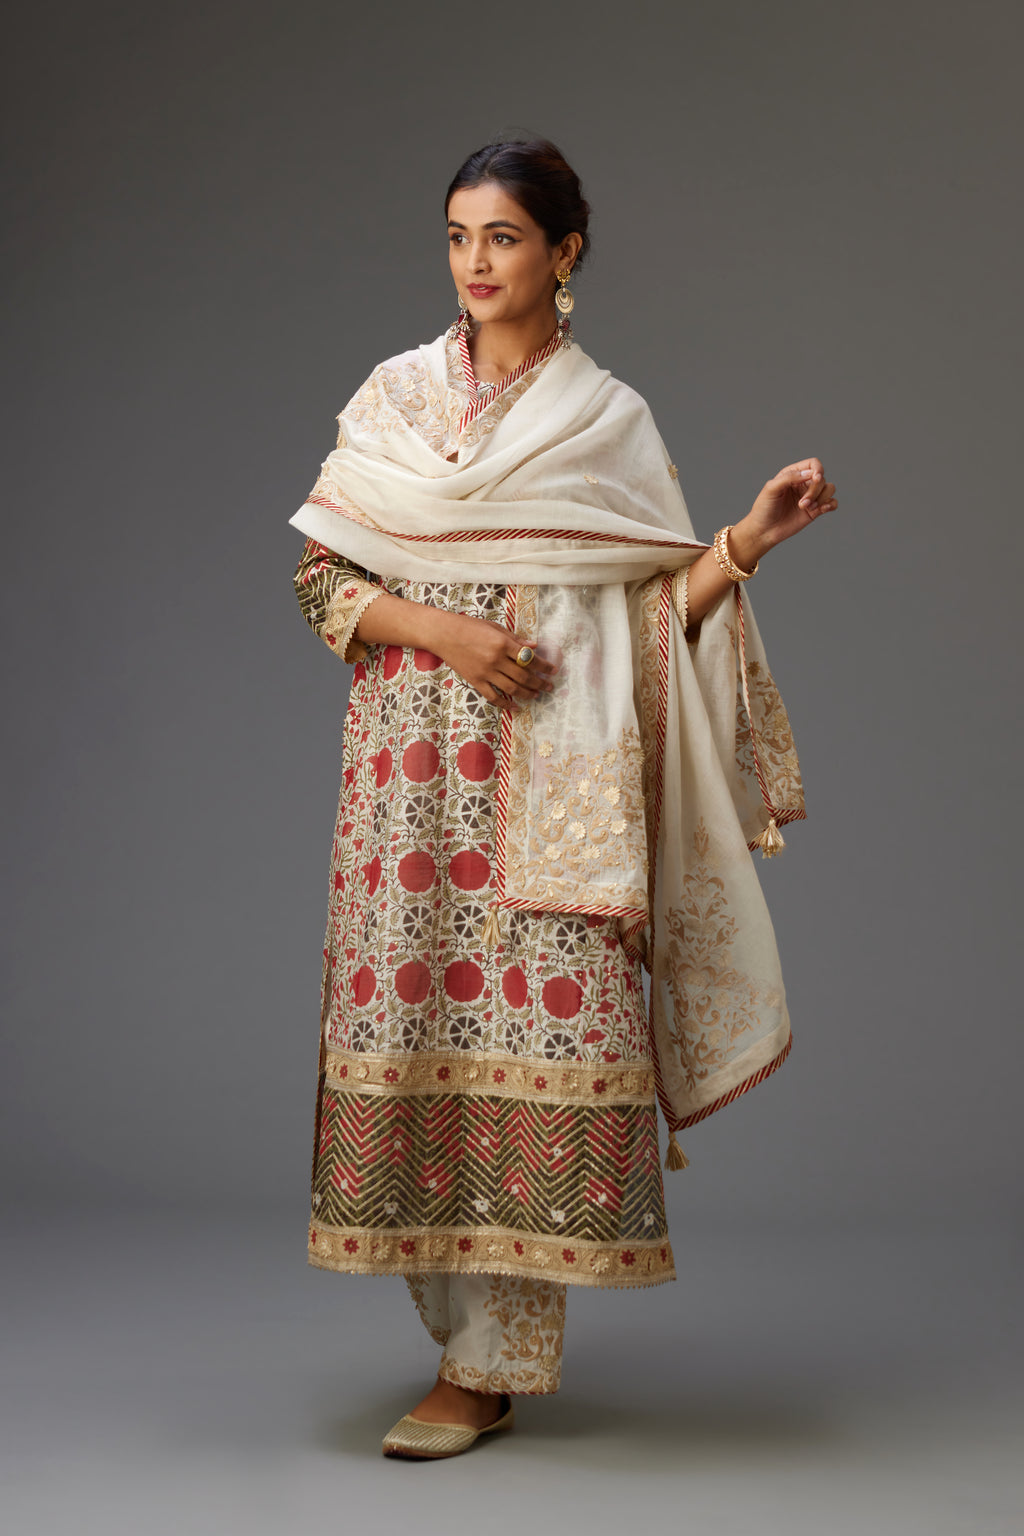 Off-white cotton chanderi dupatta with dori and gota embroidery at edges, highlighted with gold sequins.